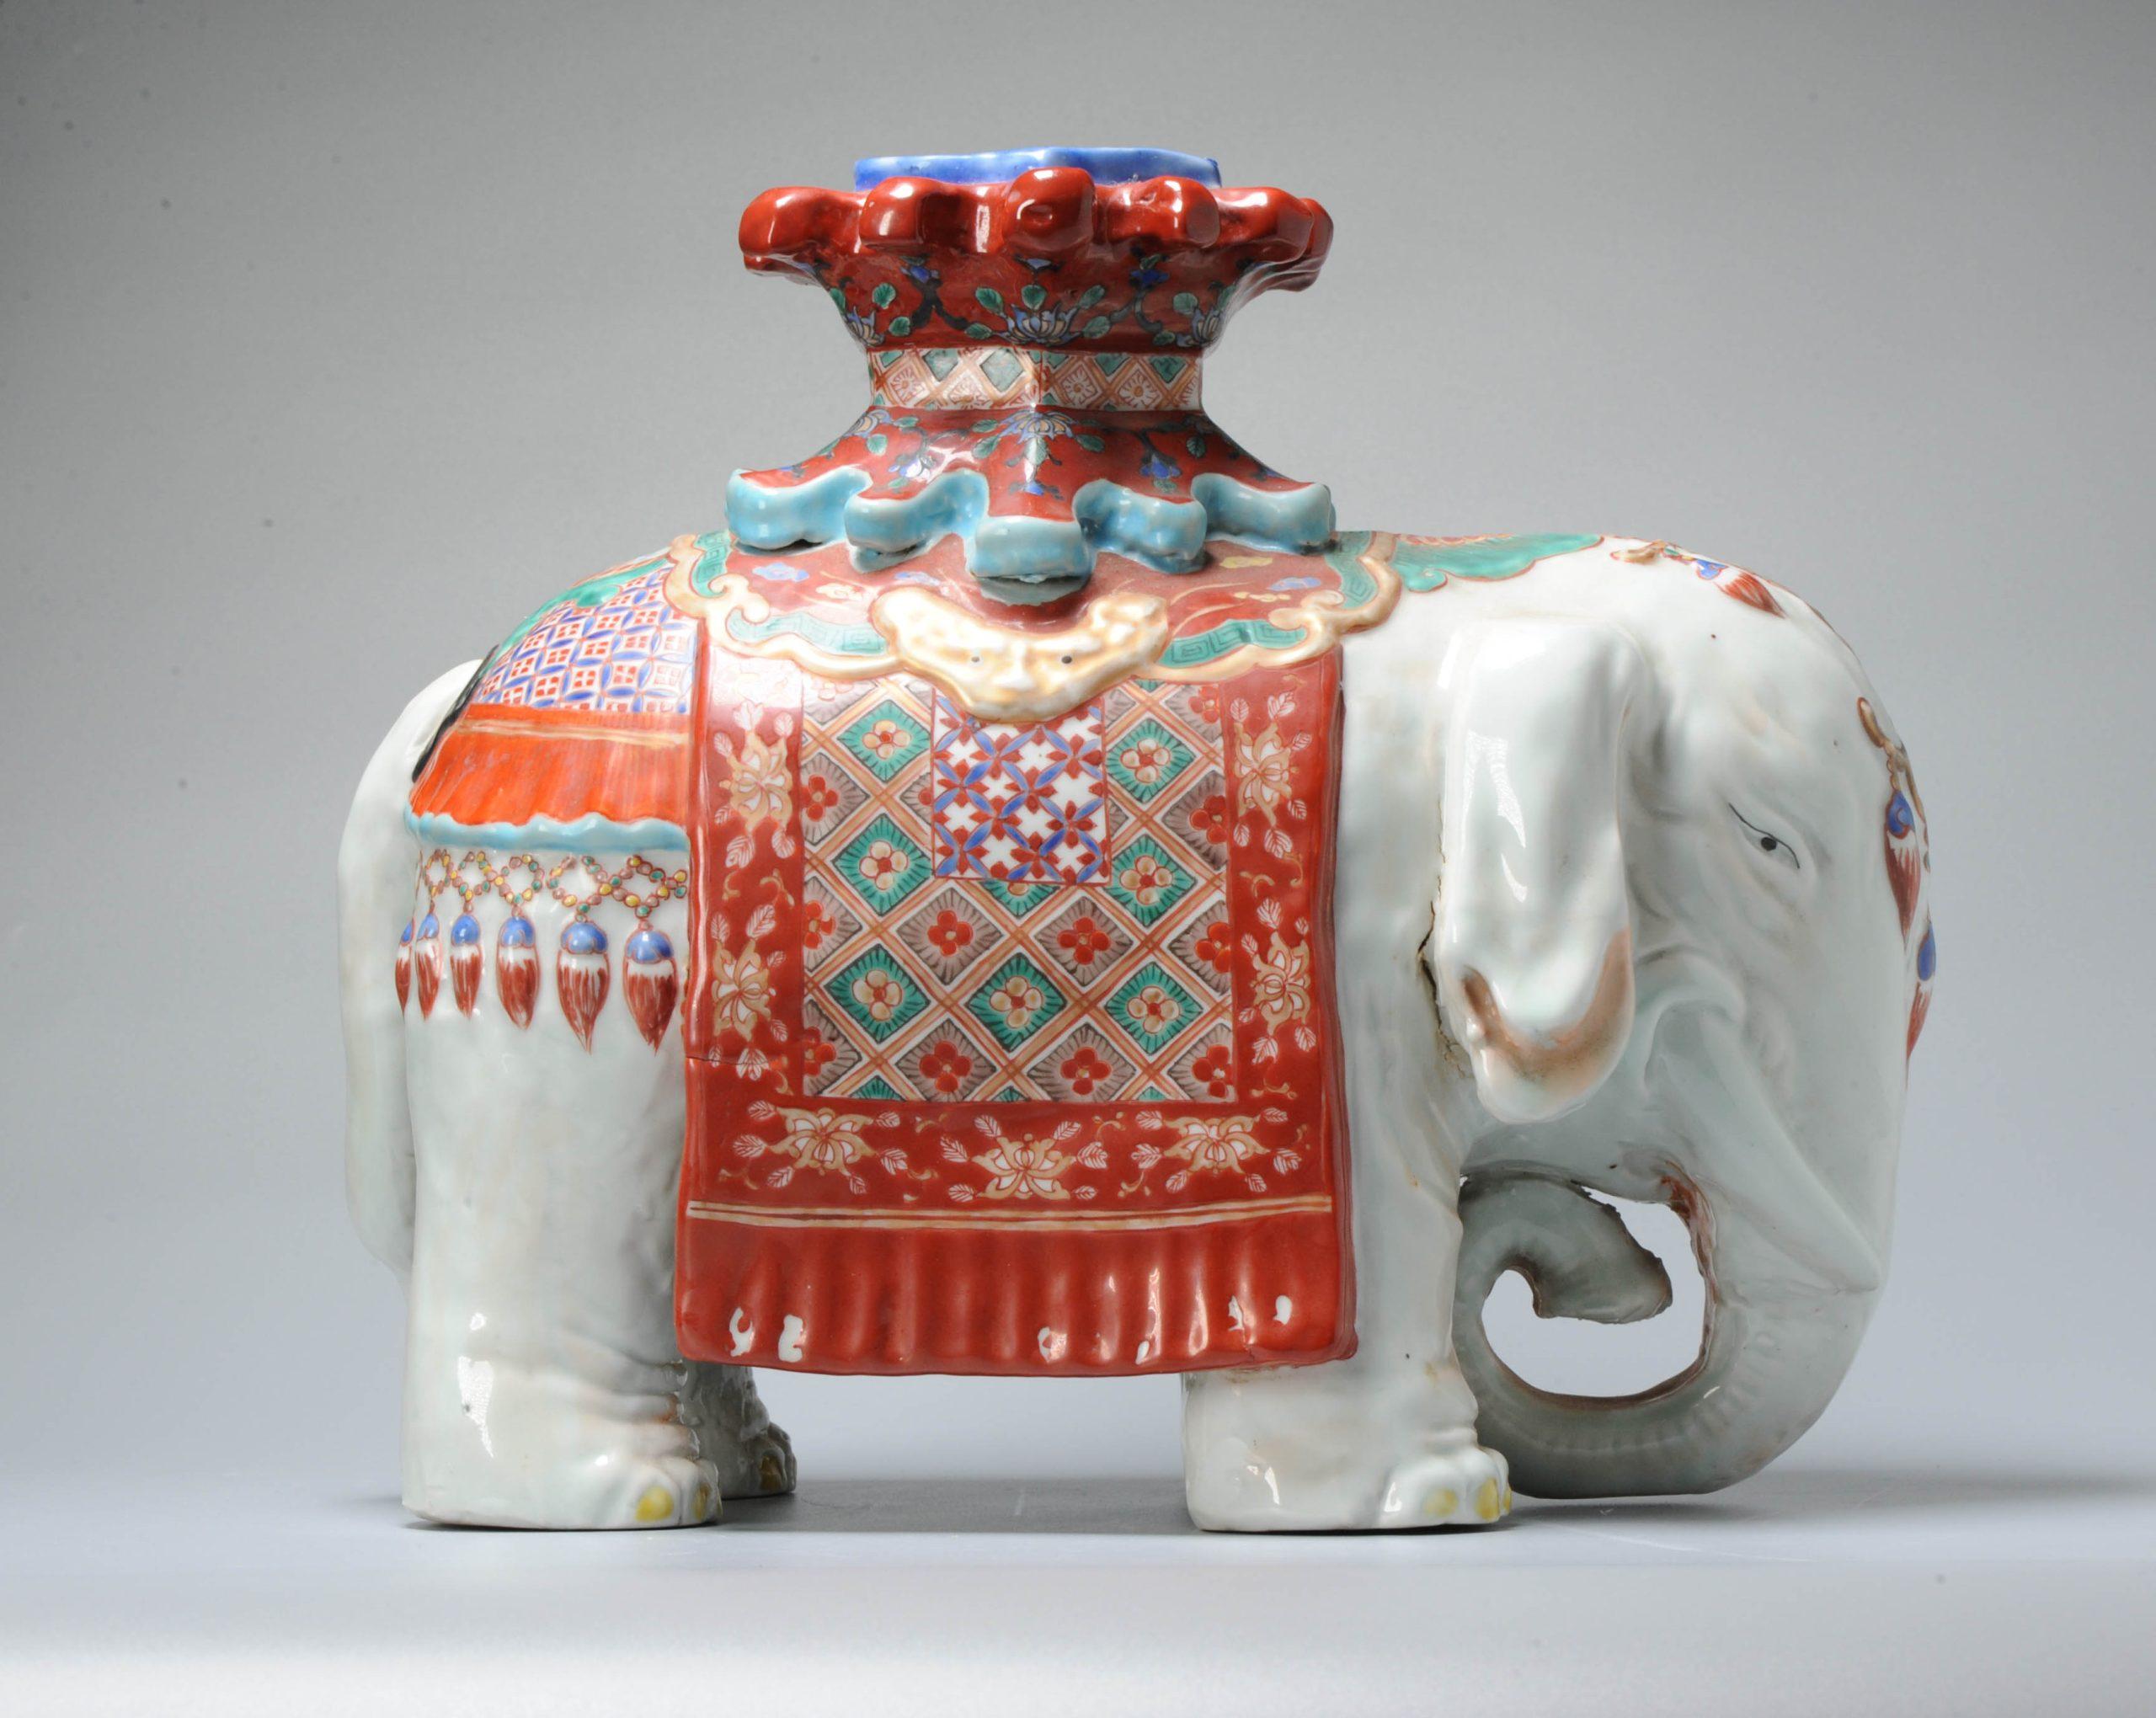 The kakiemon-style elephant carrying a pagoda on its back, with polychrome enamel decoration. For a similar elephant see.

Additional information:
Material: Porcelain & Pottery
Region of Origin: Japan
Original/Reproduction: Original
Period: 18th